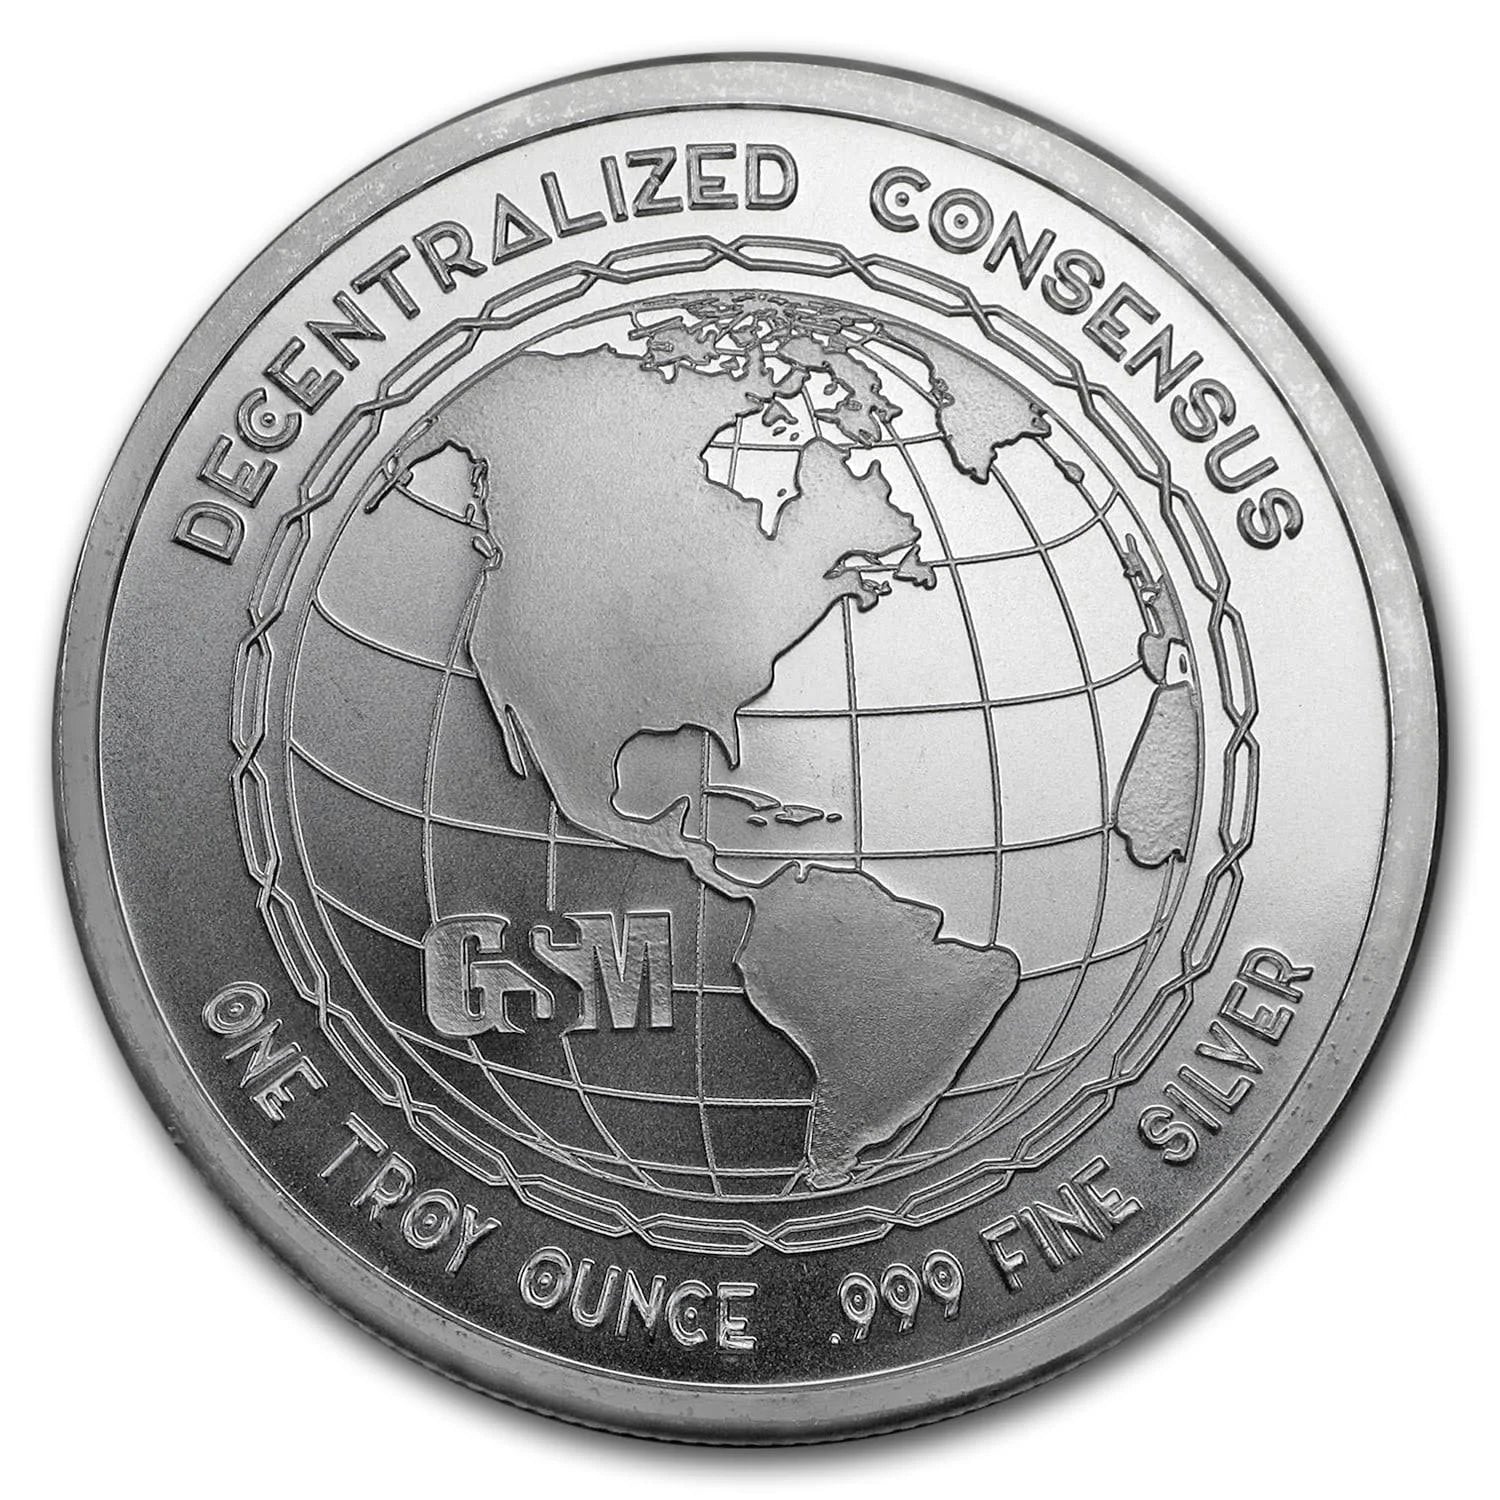 Vires In Numbers 1oz Silver Bitcoin - OZB